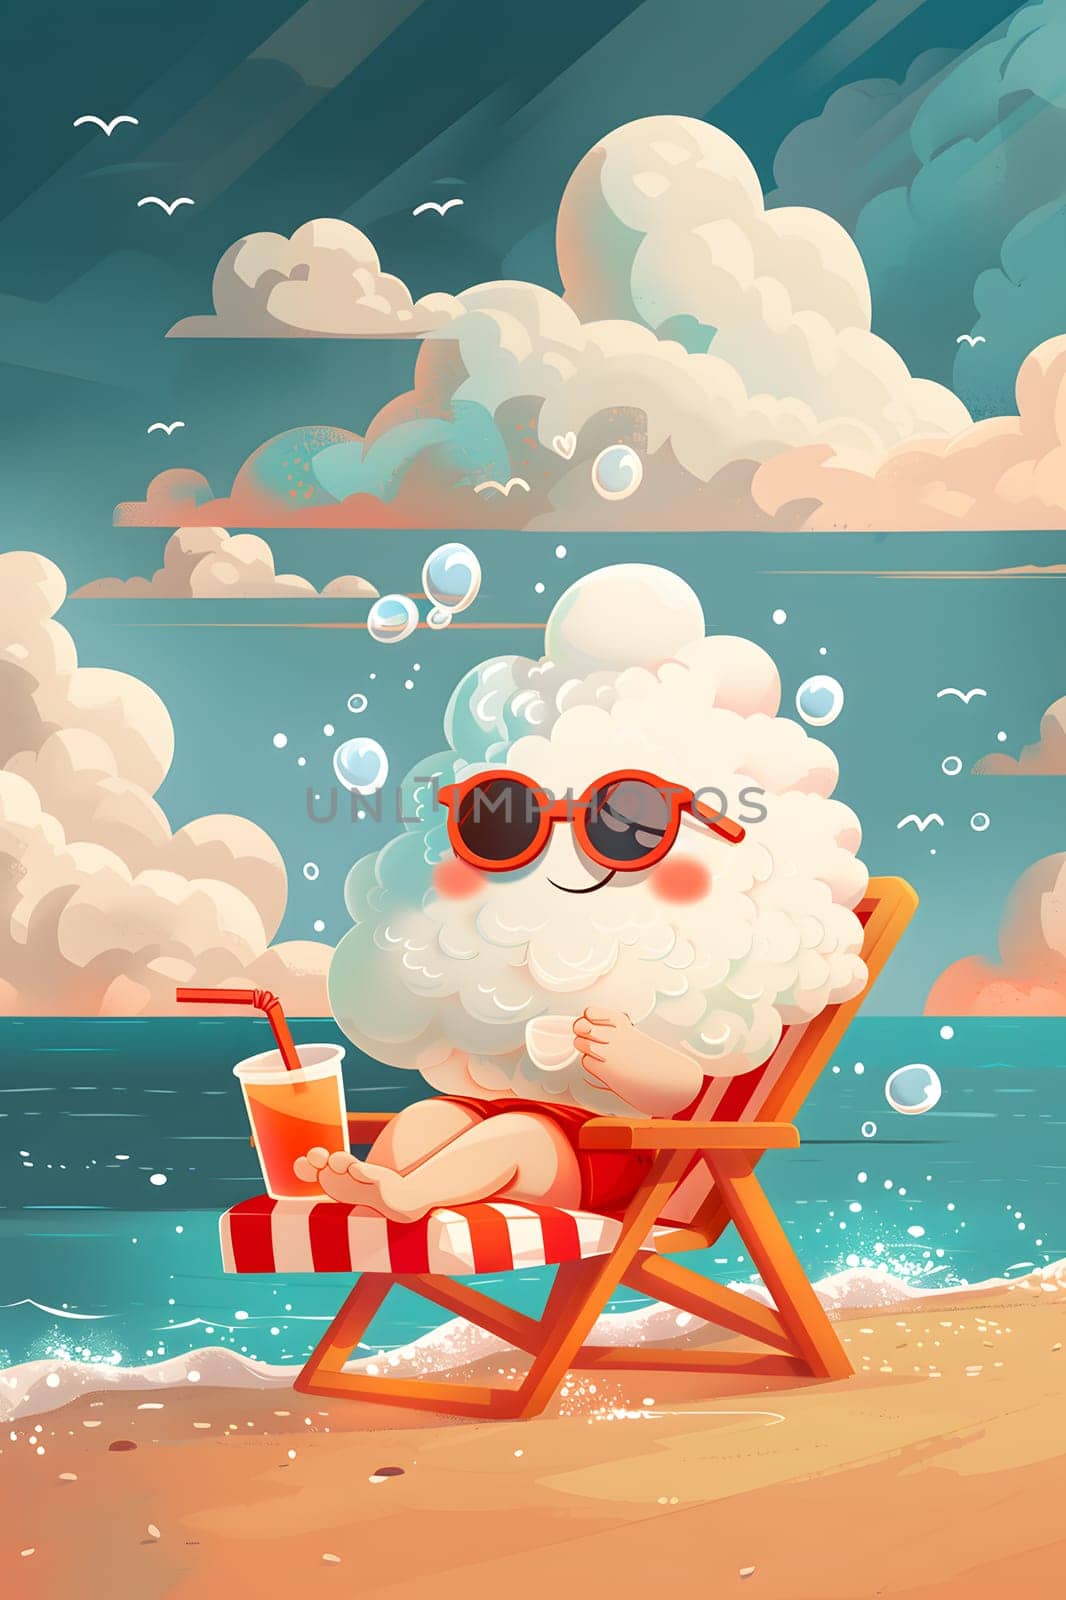 A happy cartoon character is sitting in a chair on the beach, painting the azure sky filled with fluffy cumulus clouds using aqua paint